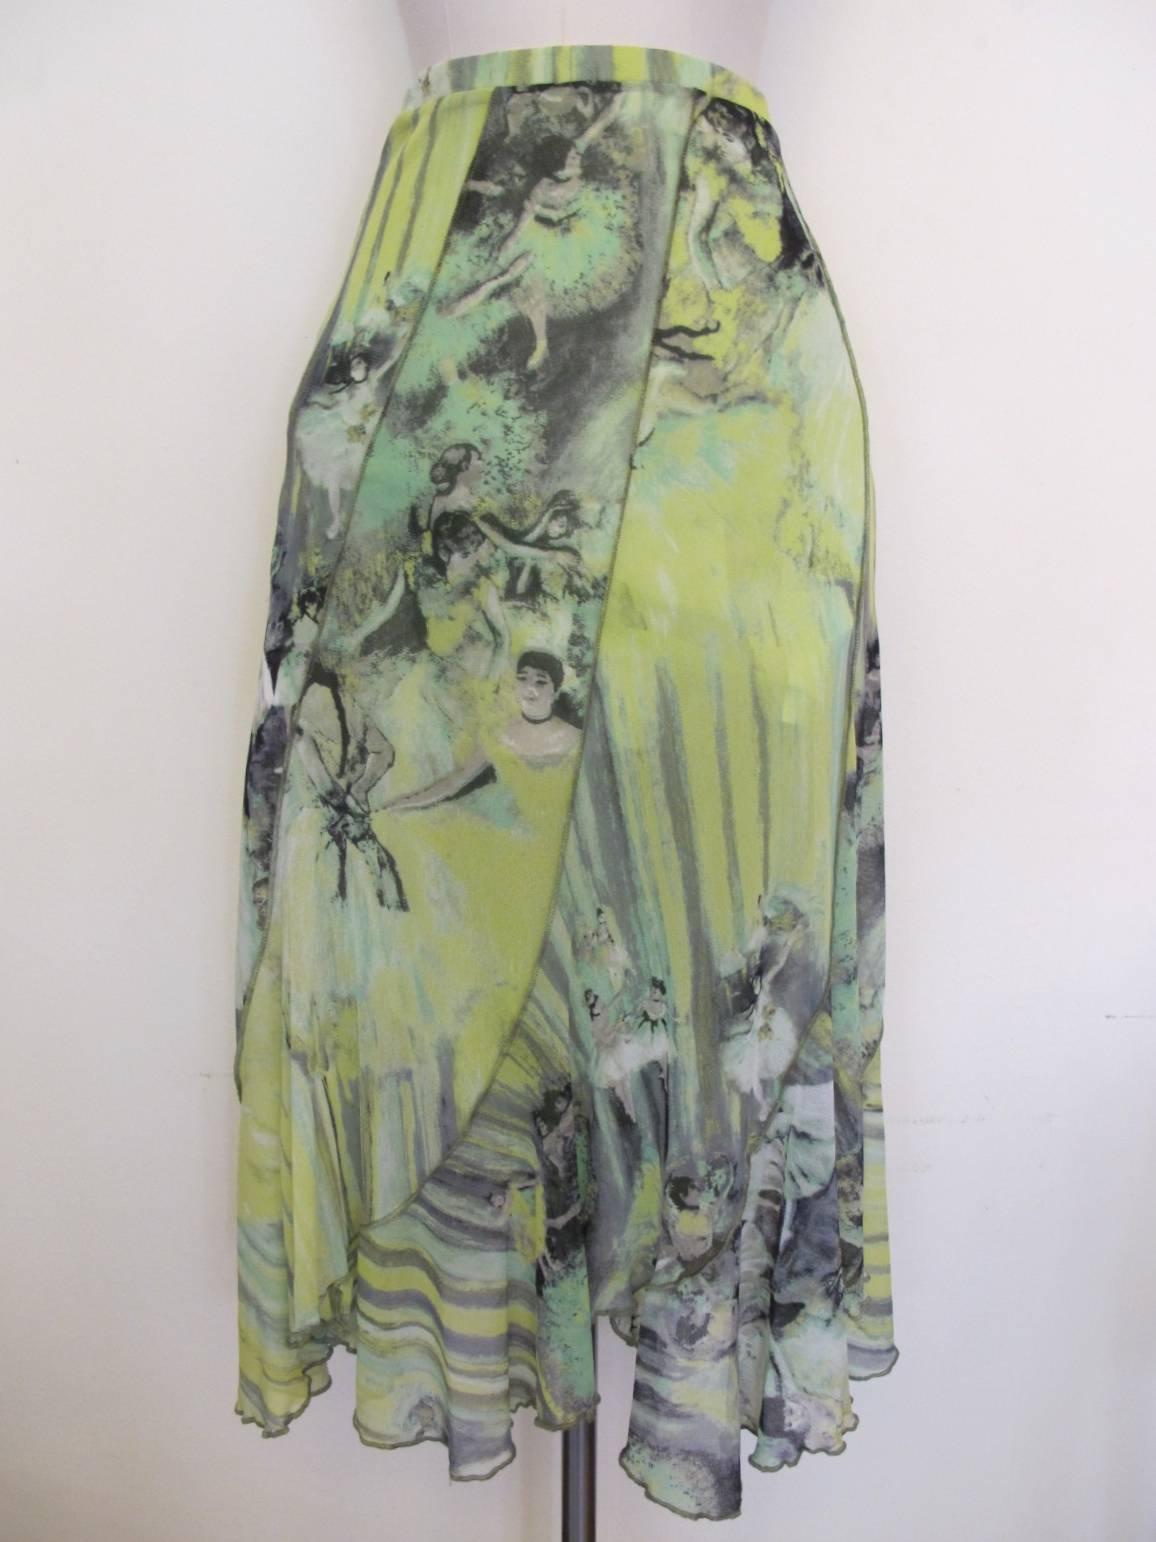 This gorgeous umbrella cut skirt flares out when walking. The super stretch fabric lends to the perfect fit of the fashion piece. Lime green chartreuse and black are the colors which serve as the background for the exquisite ballerina theme. Length